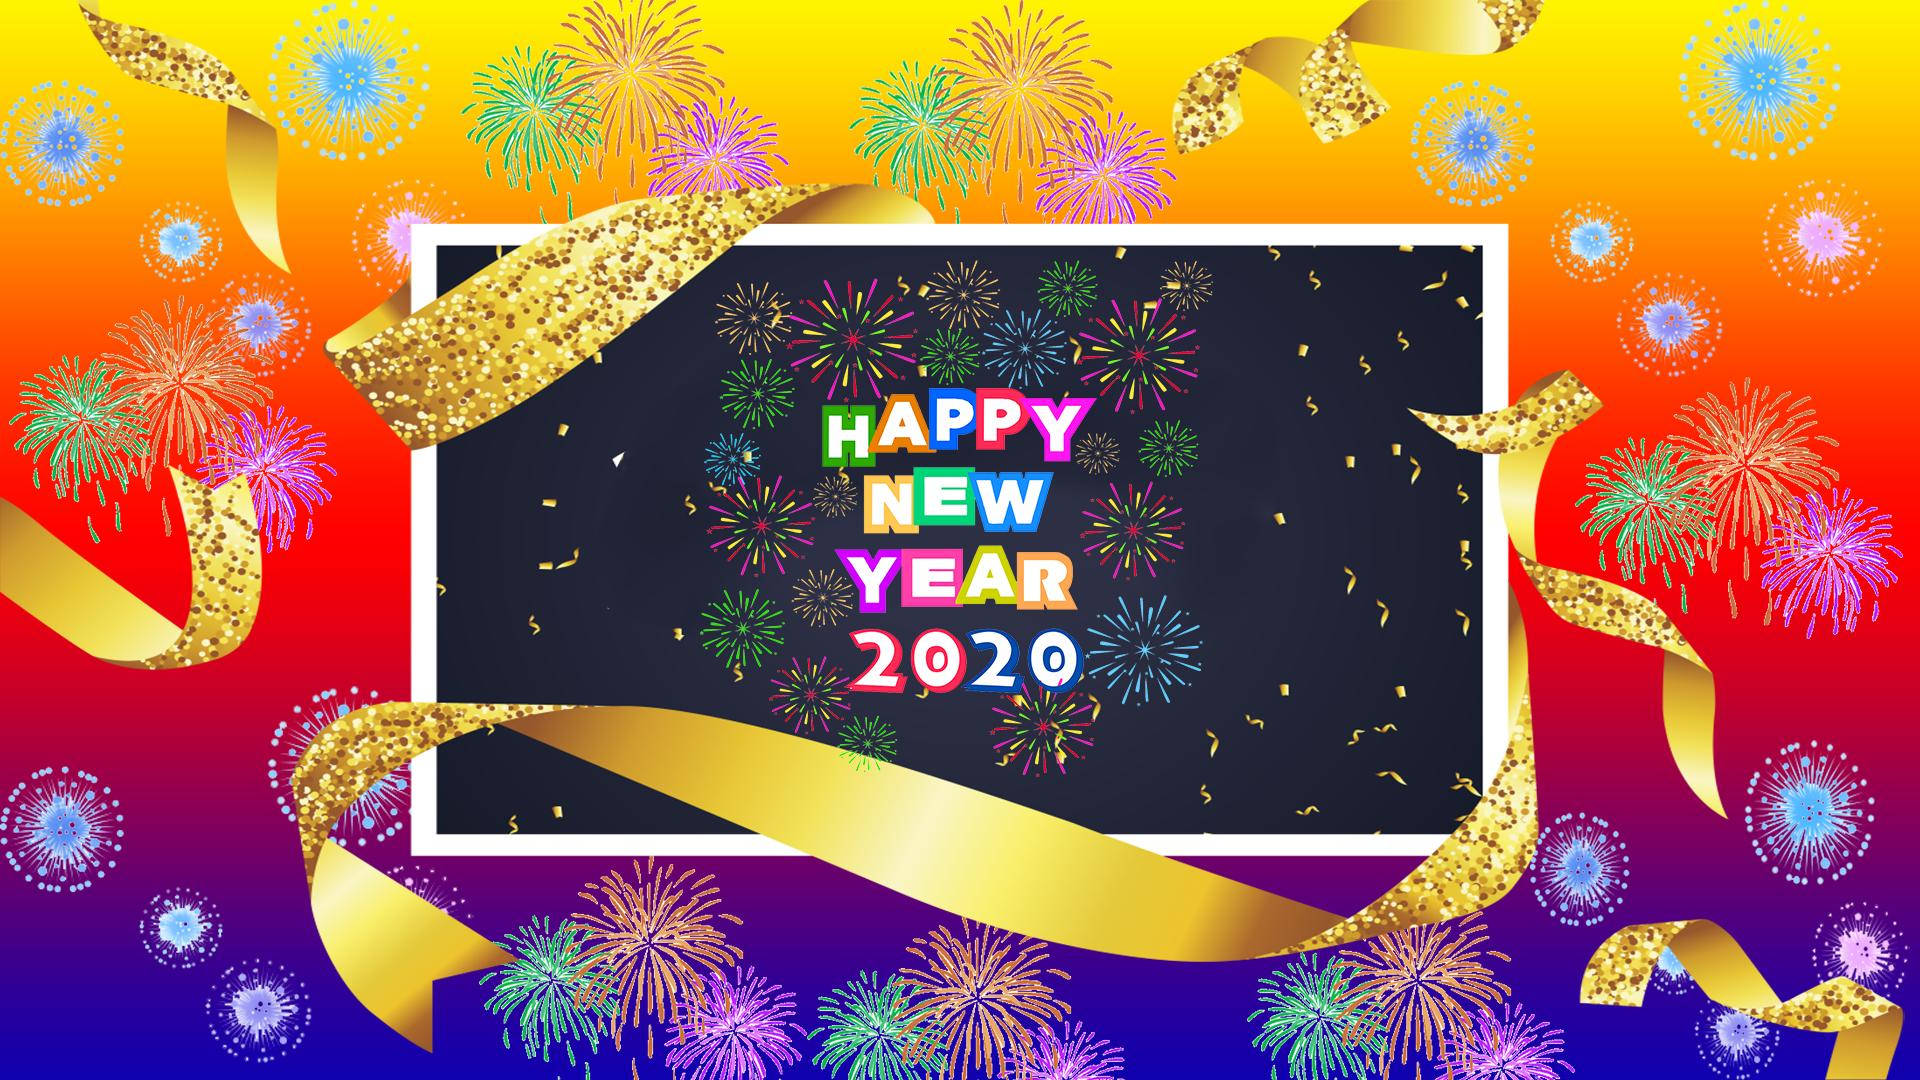 Happy New Year 2020 - A Year to Make Dreams a Reality! Wallpaper